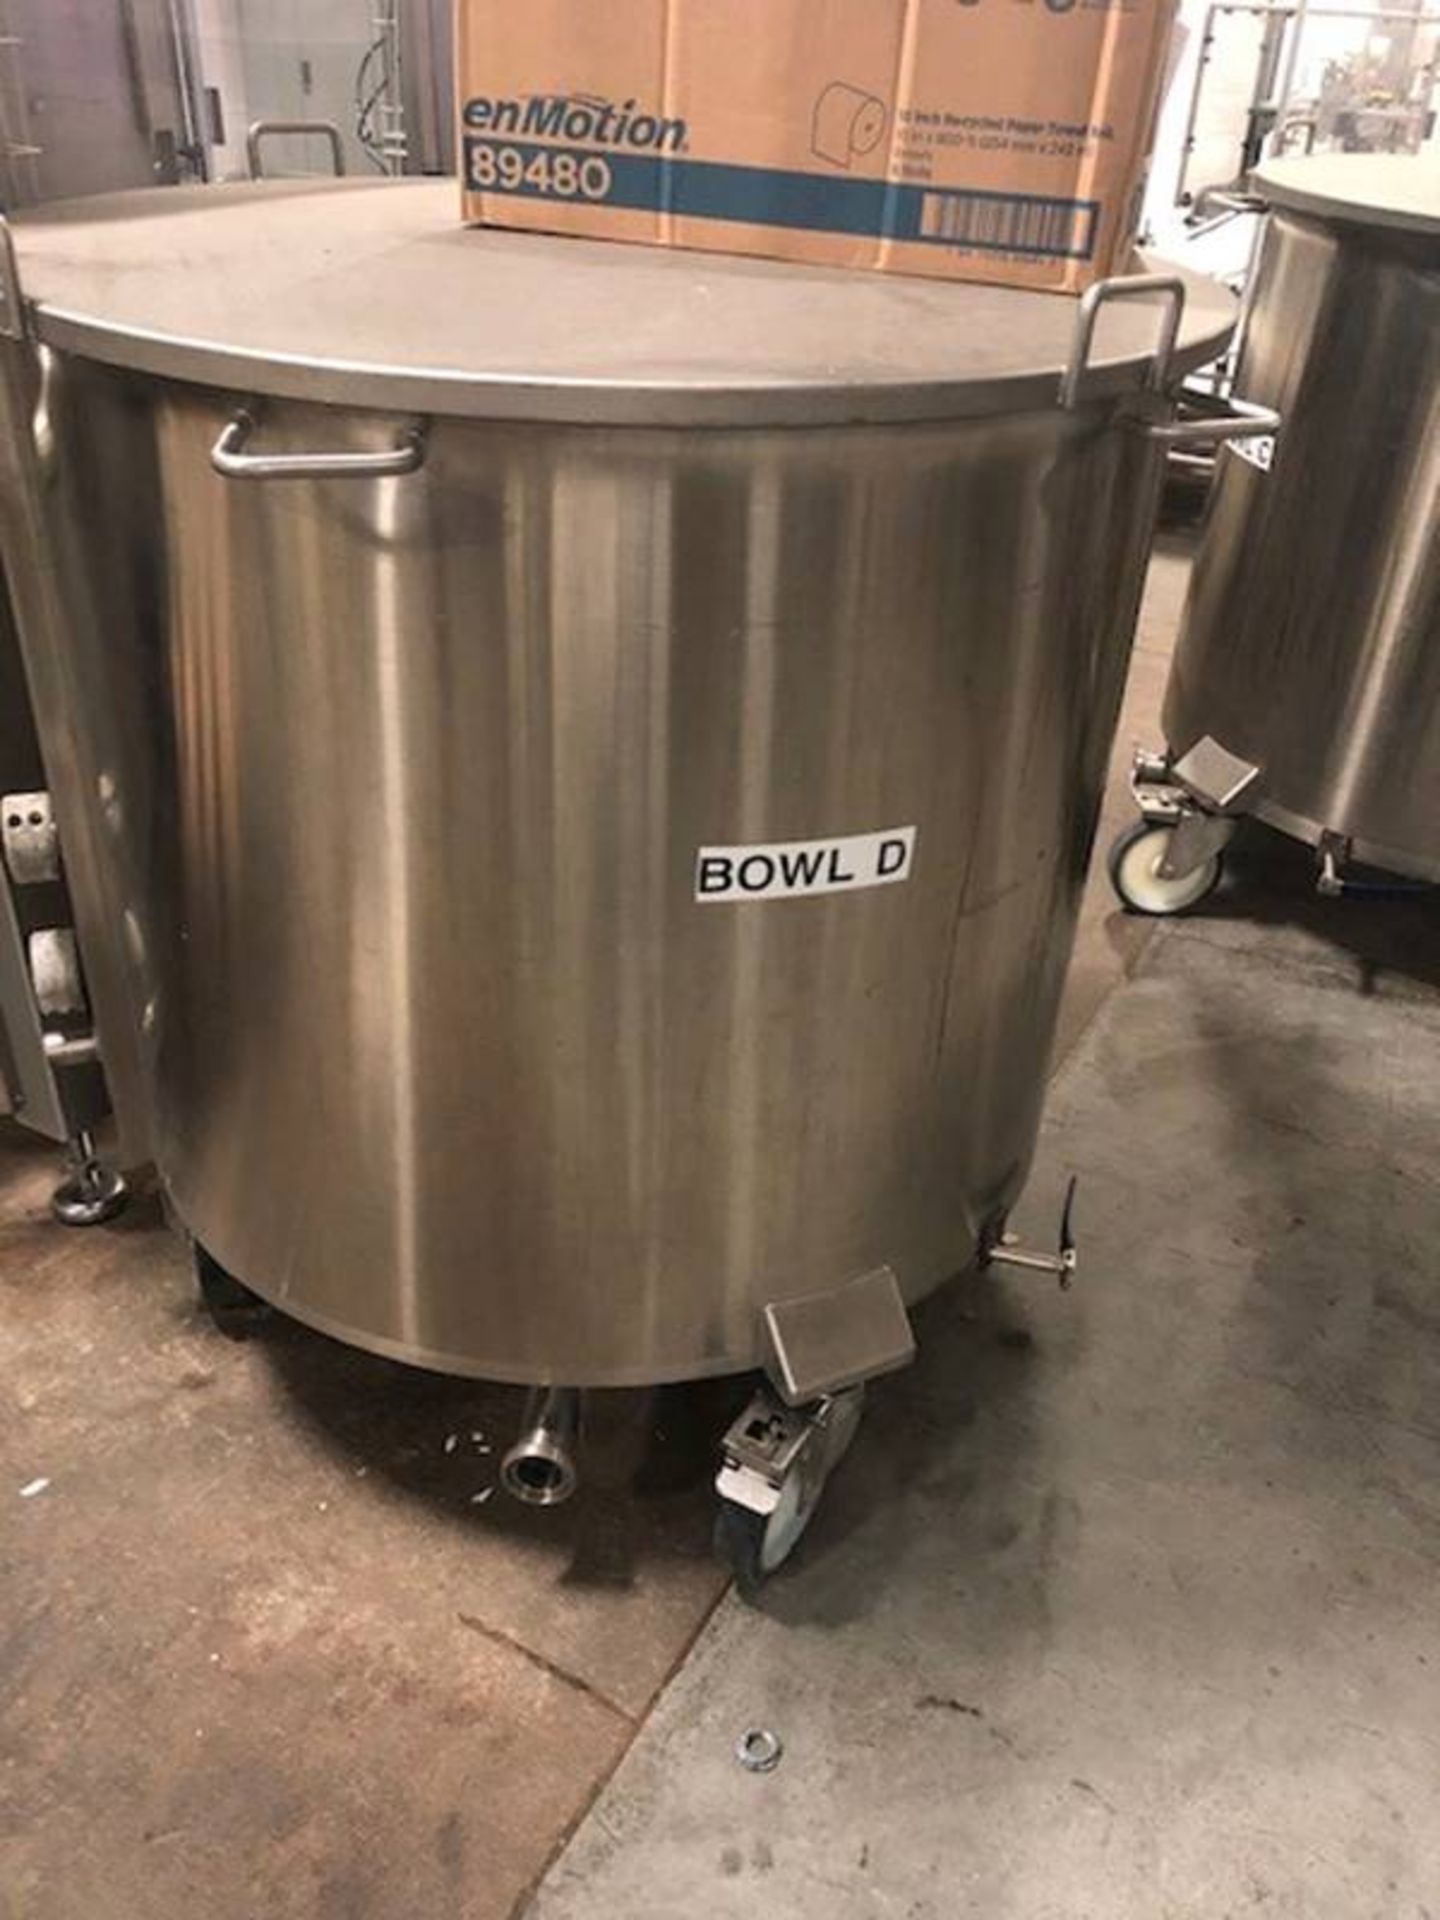 2018 Tonelli Pneumatic Bowl Pump, Model TSB 800, w/ (4) 800 Liter SS Bowls with Lid | Rig Fee $750 - Image 2 of 3